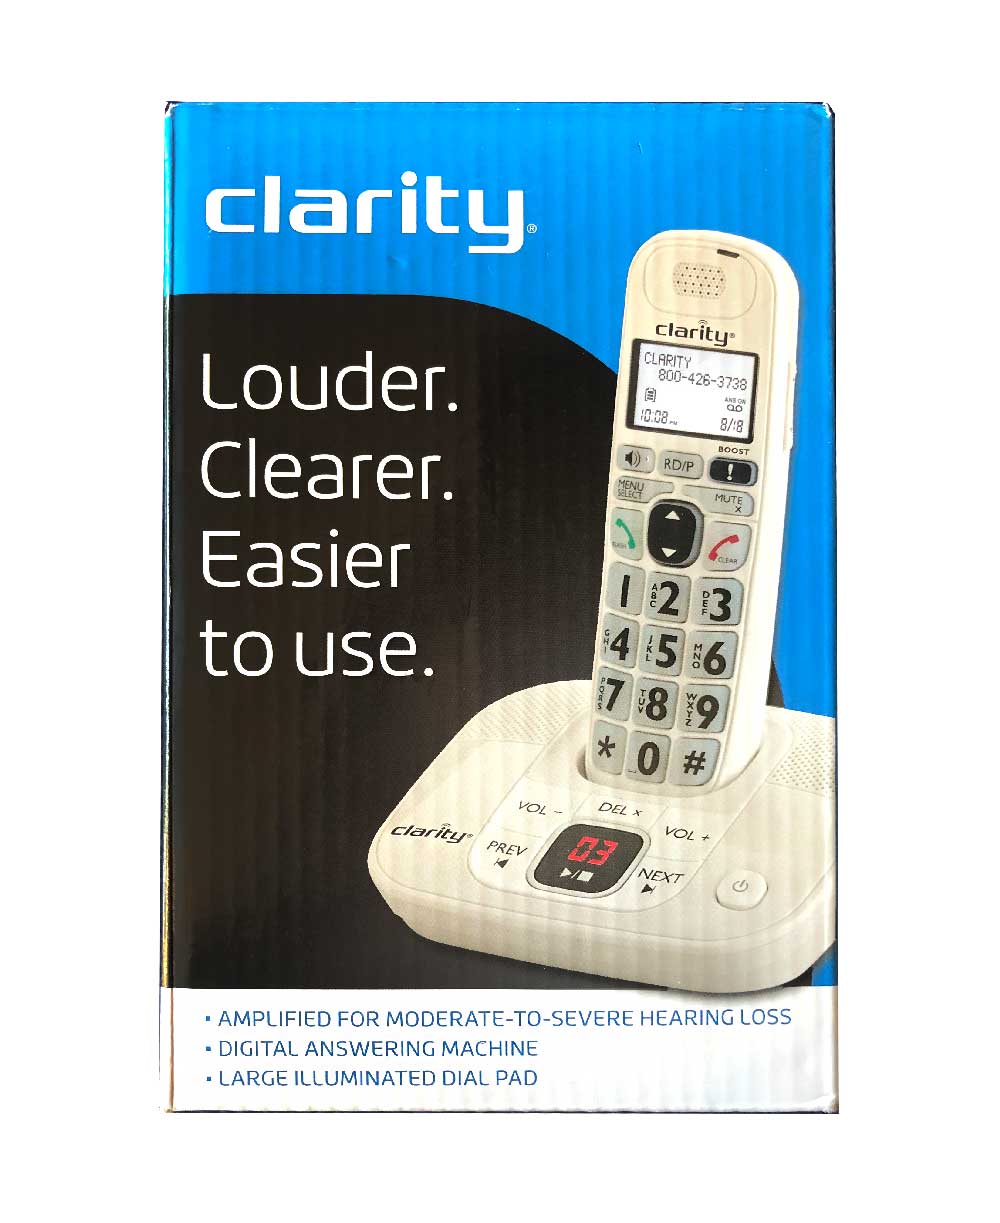 clarity amplified cordless TEAP phone